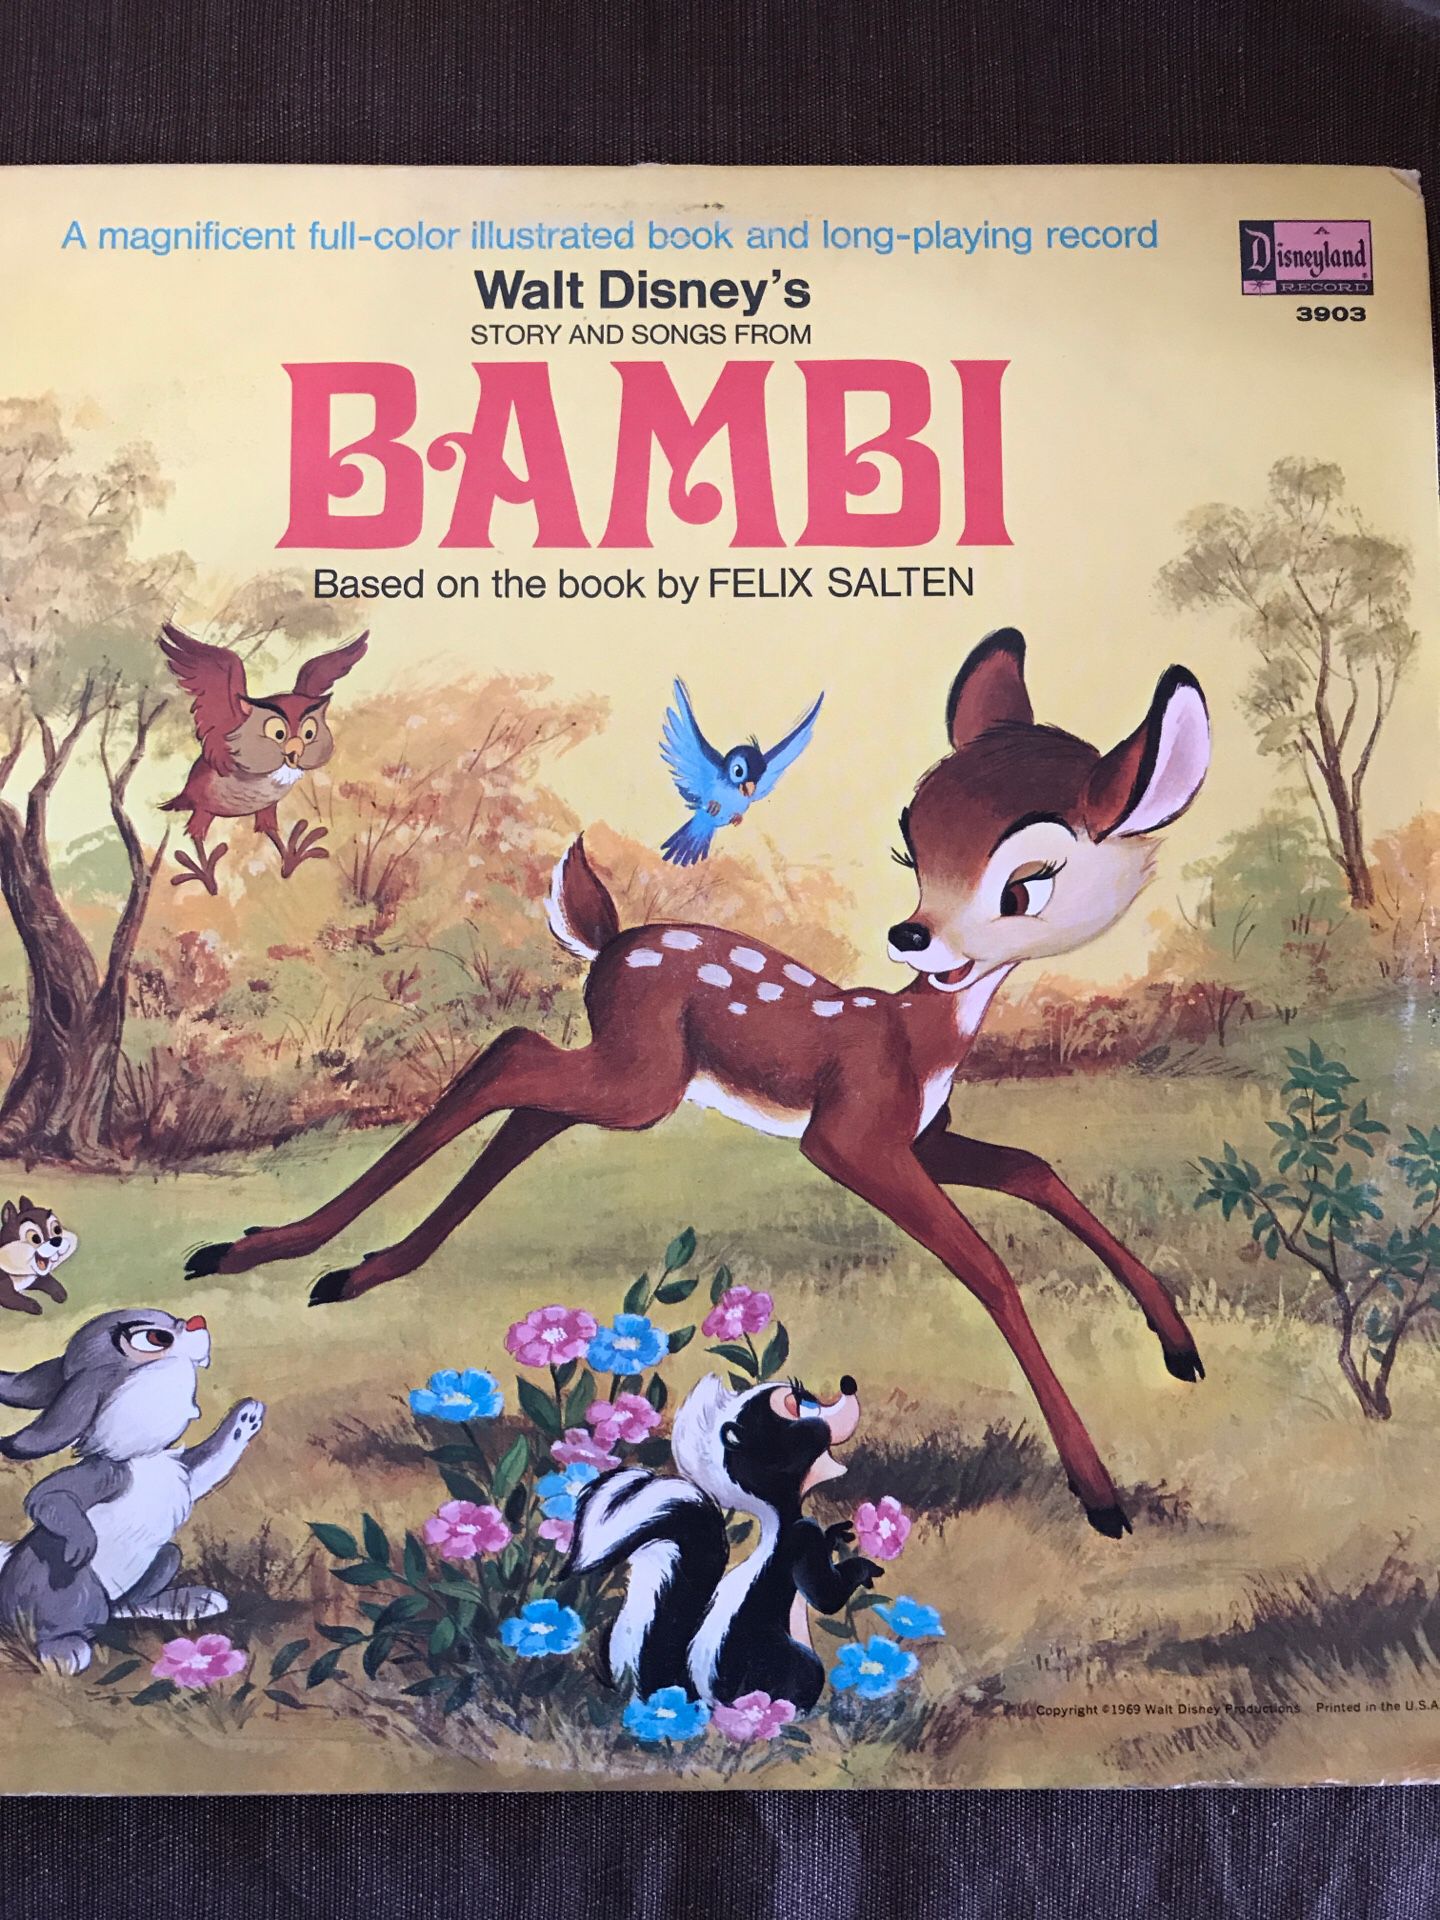 Walt Disney’s Story and Songs From Bambi 12” Vinyl Record/Book 1969 VG+ 3903